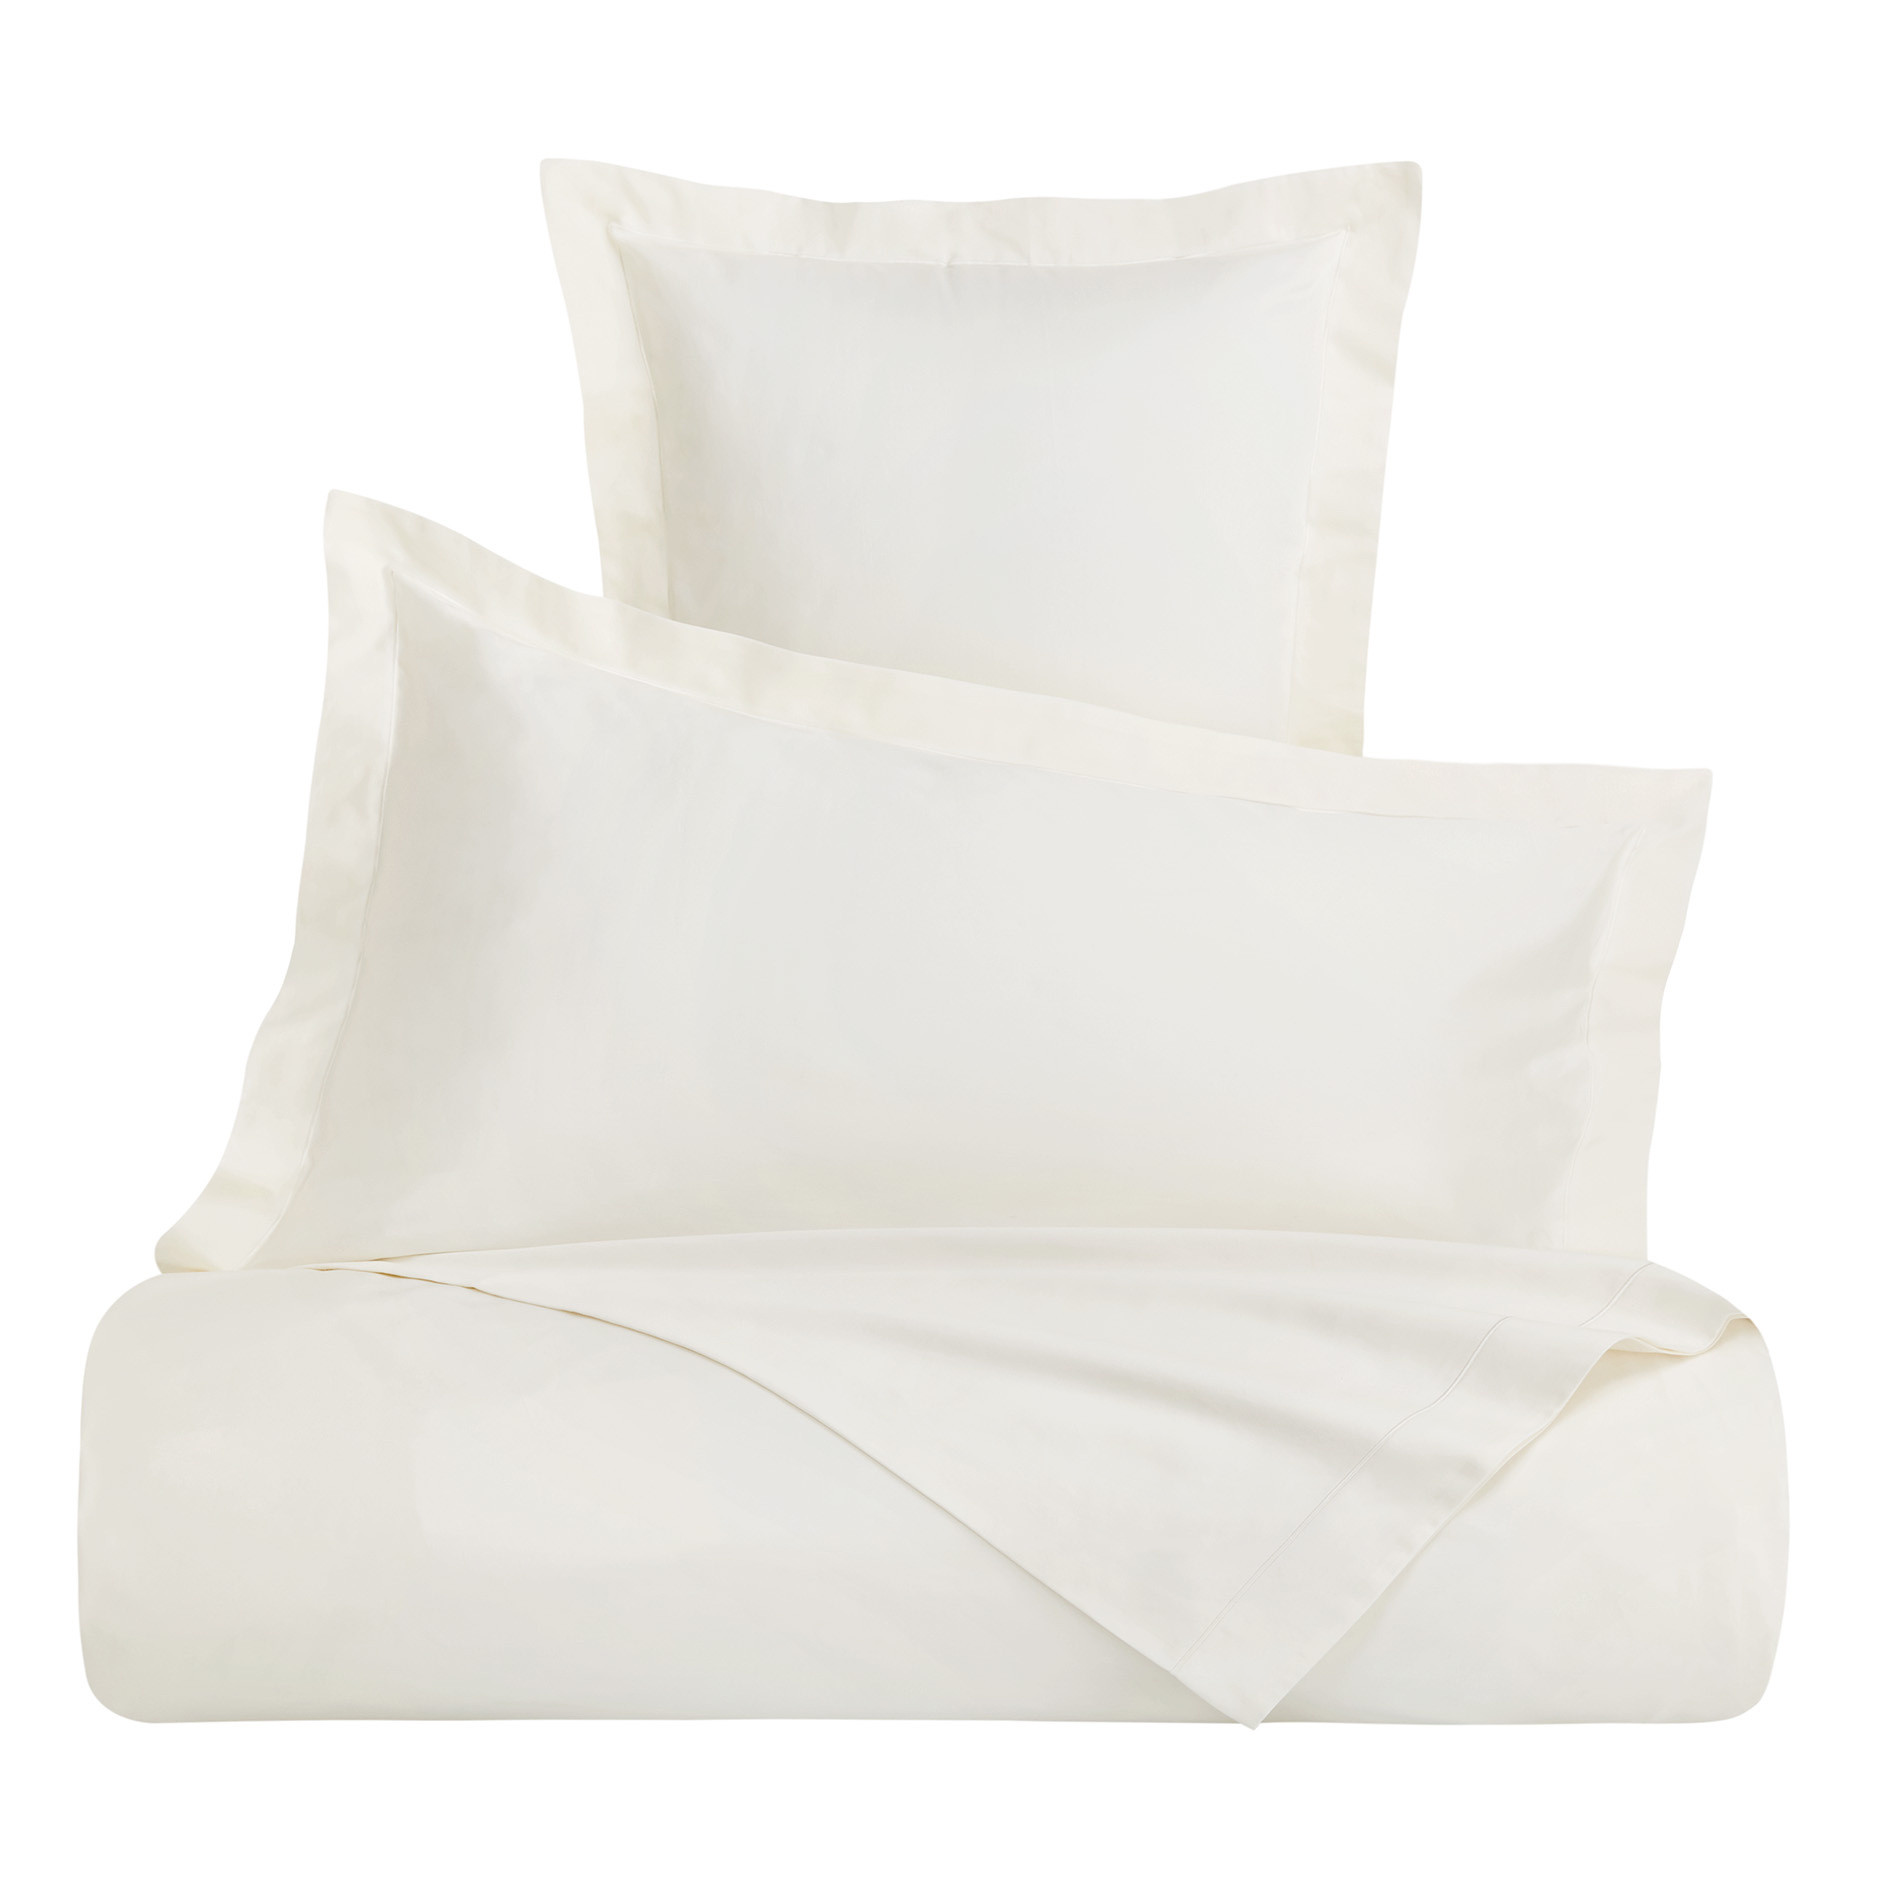 Pillowcase in TC400 satin cotton, Beige, large image number 1